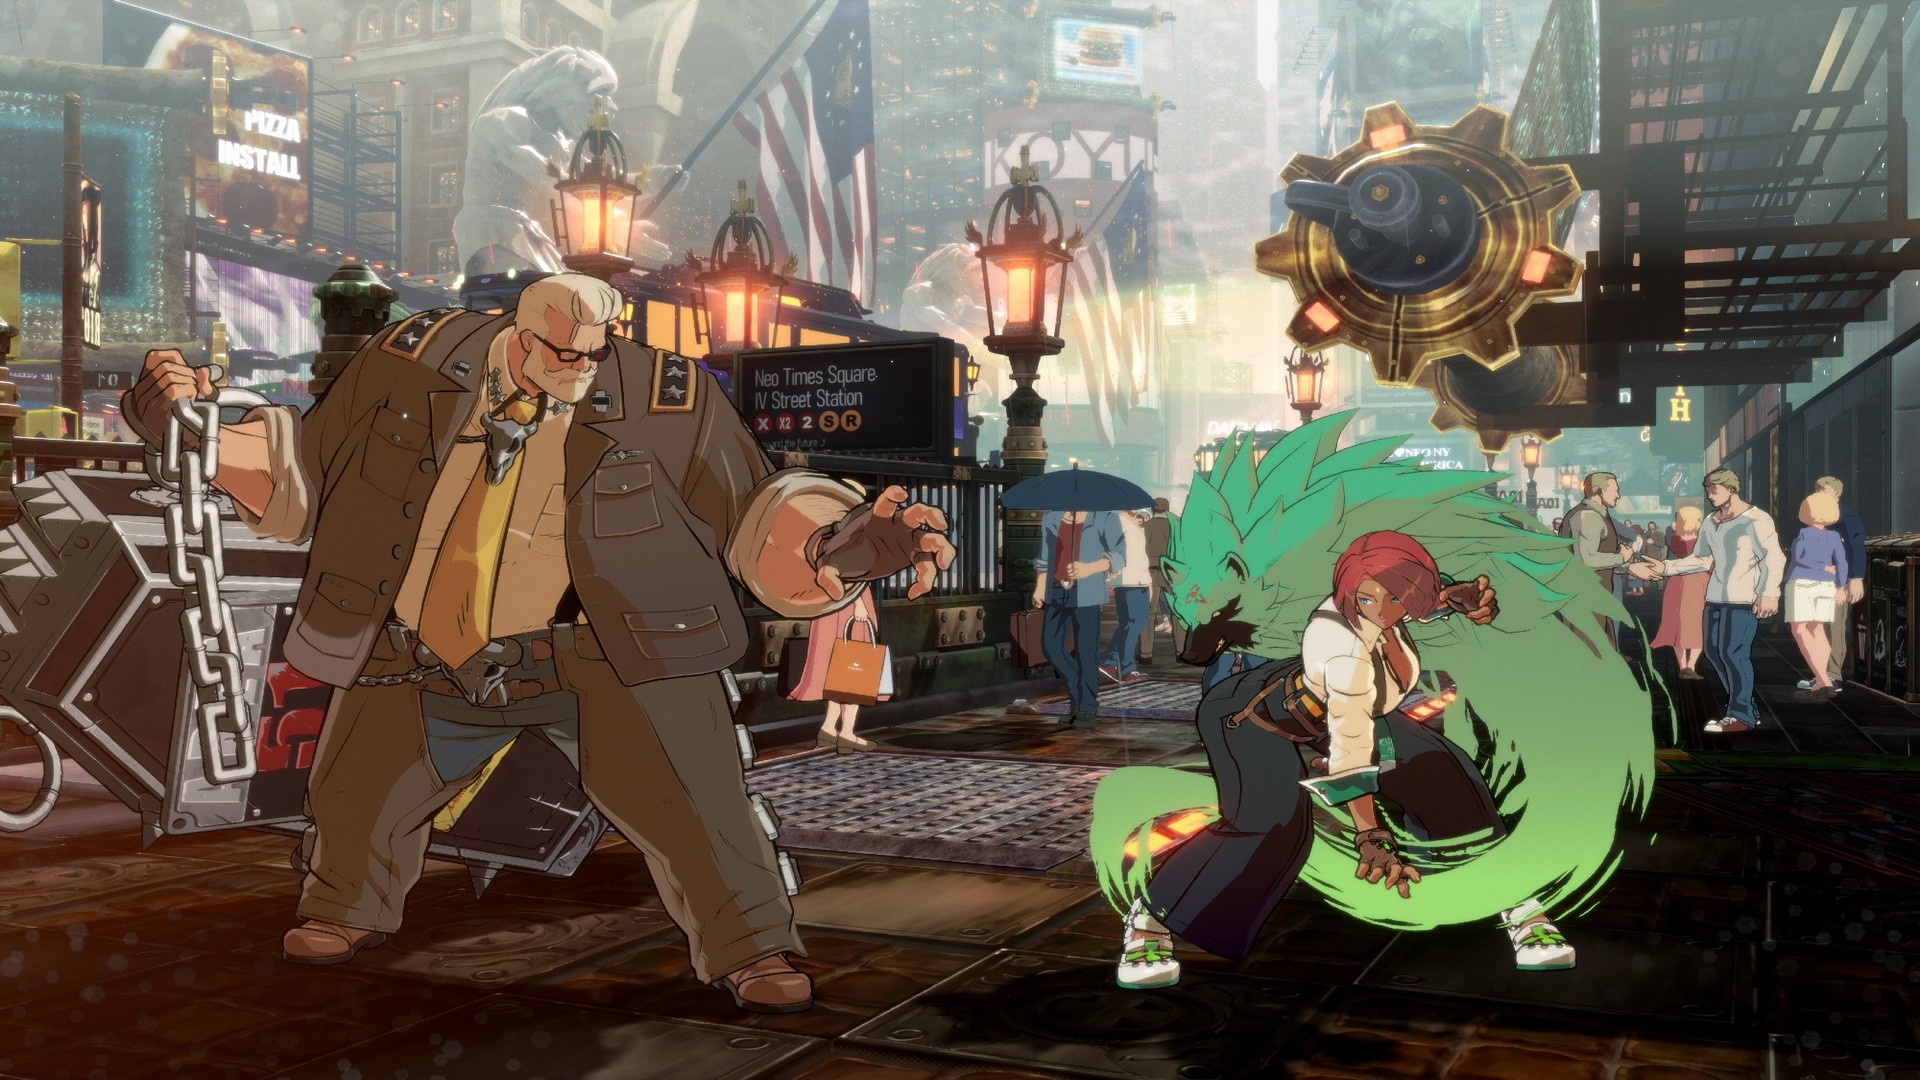 Goldlewis Dickinson Is The First Season Pass Character To Join Guilty Gear -Strive- Roster